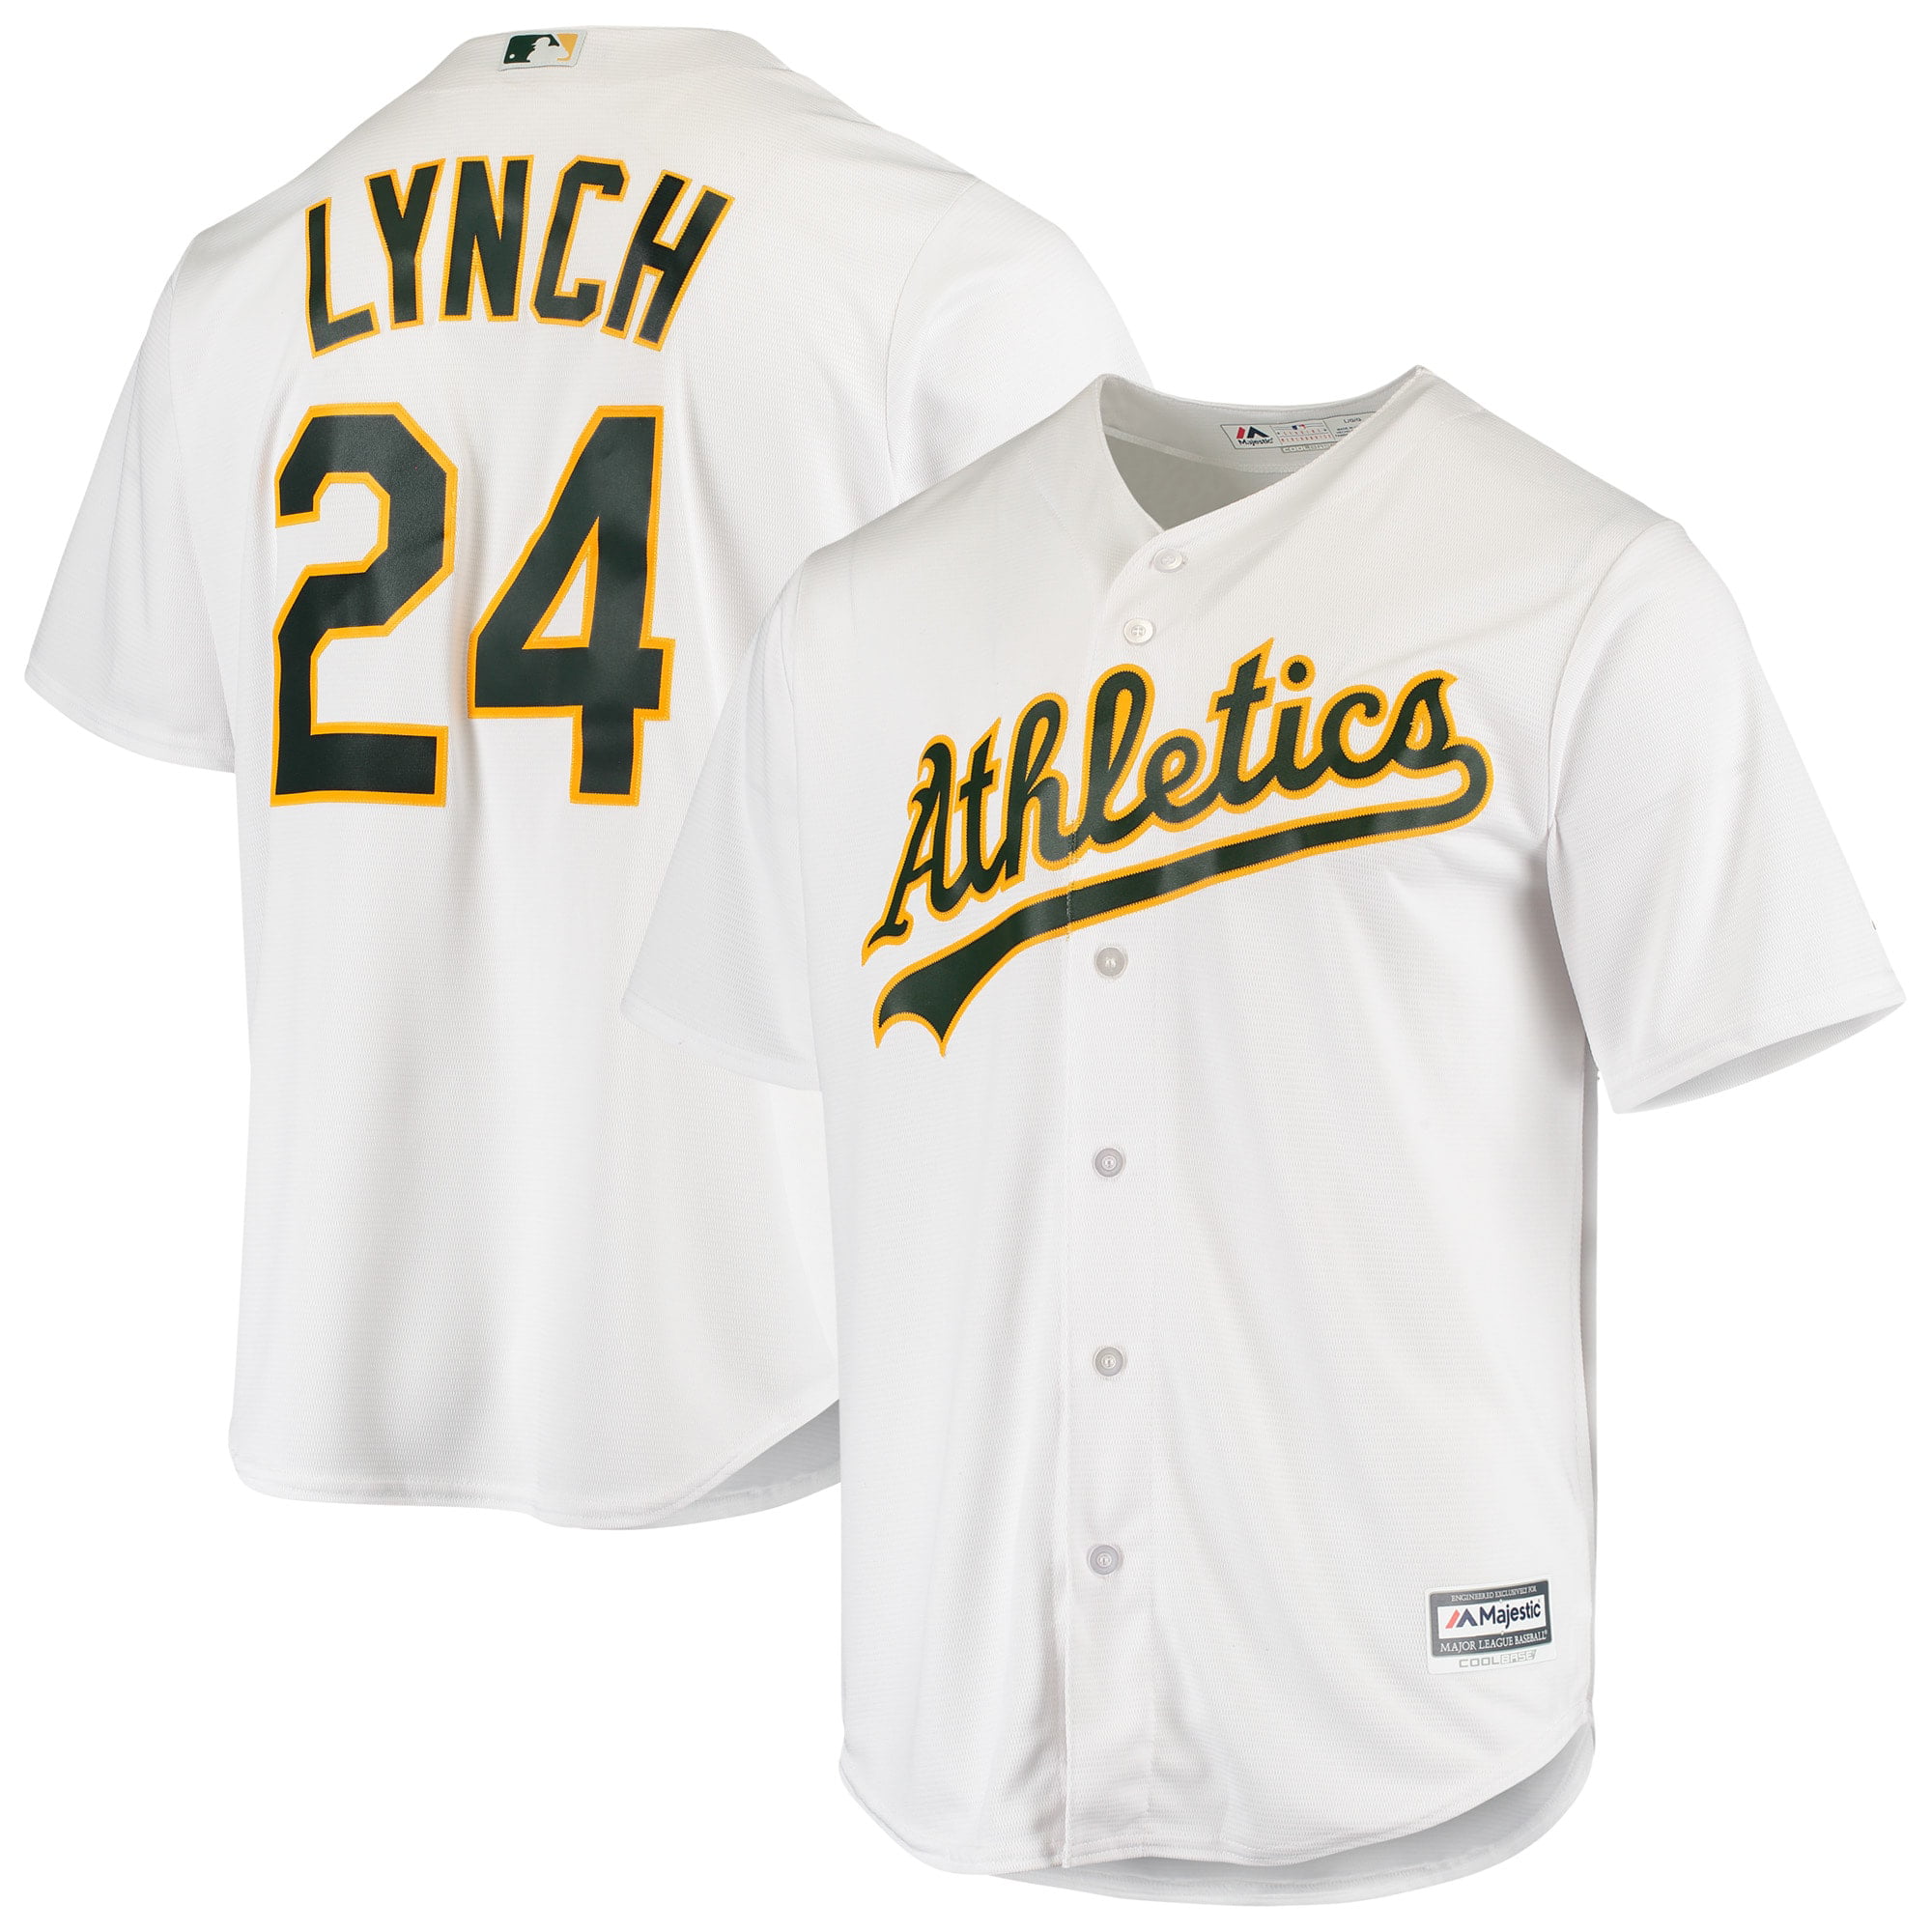 cool base player jersey